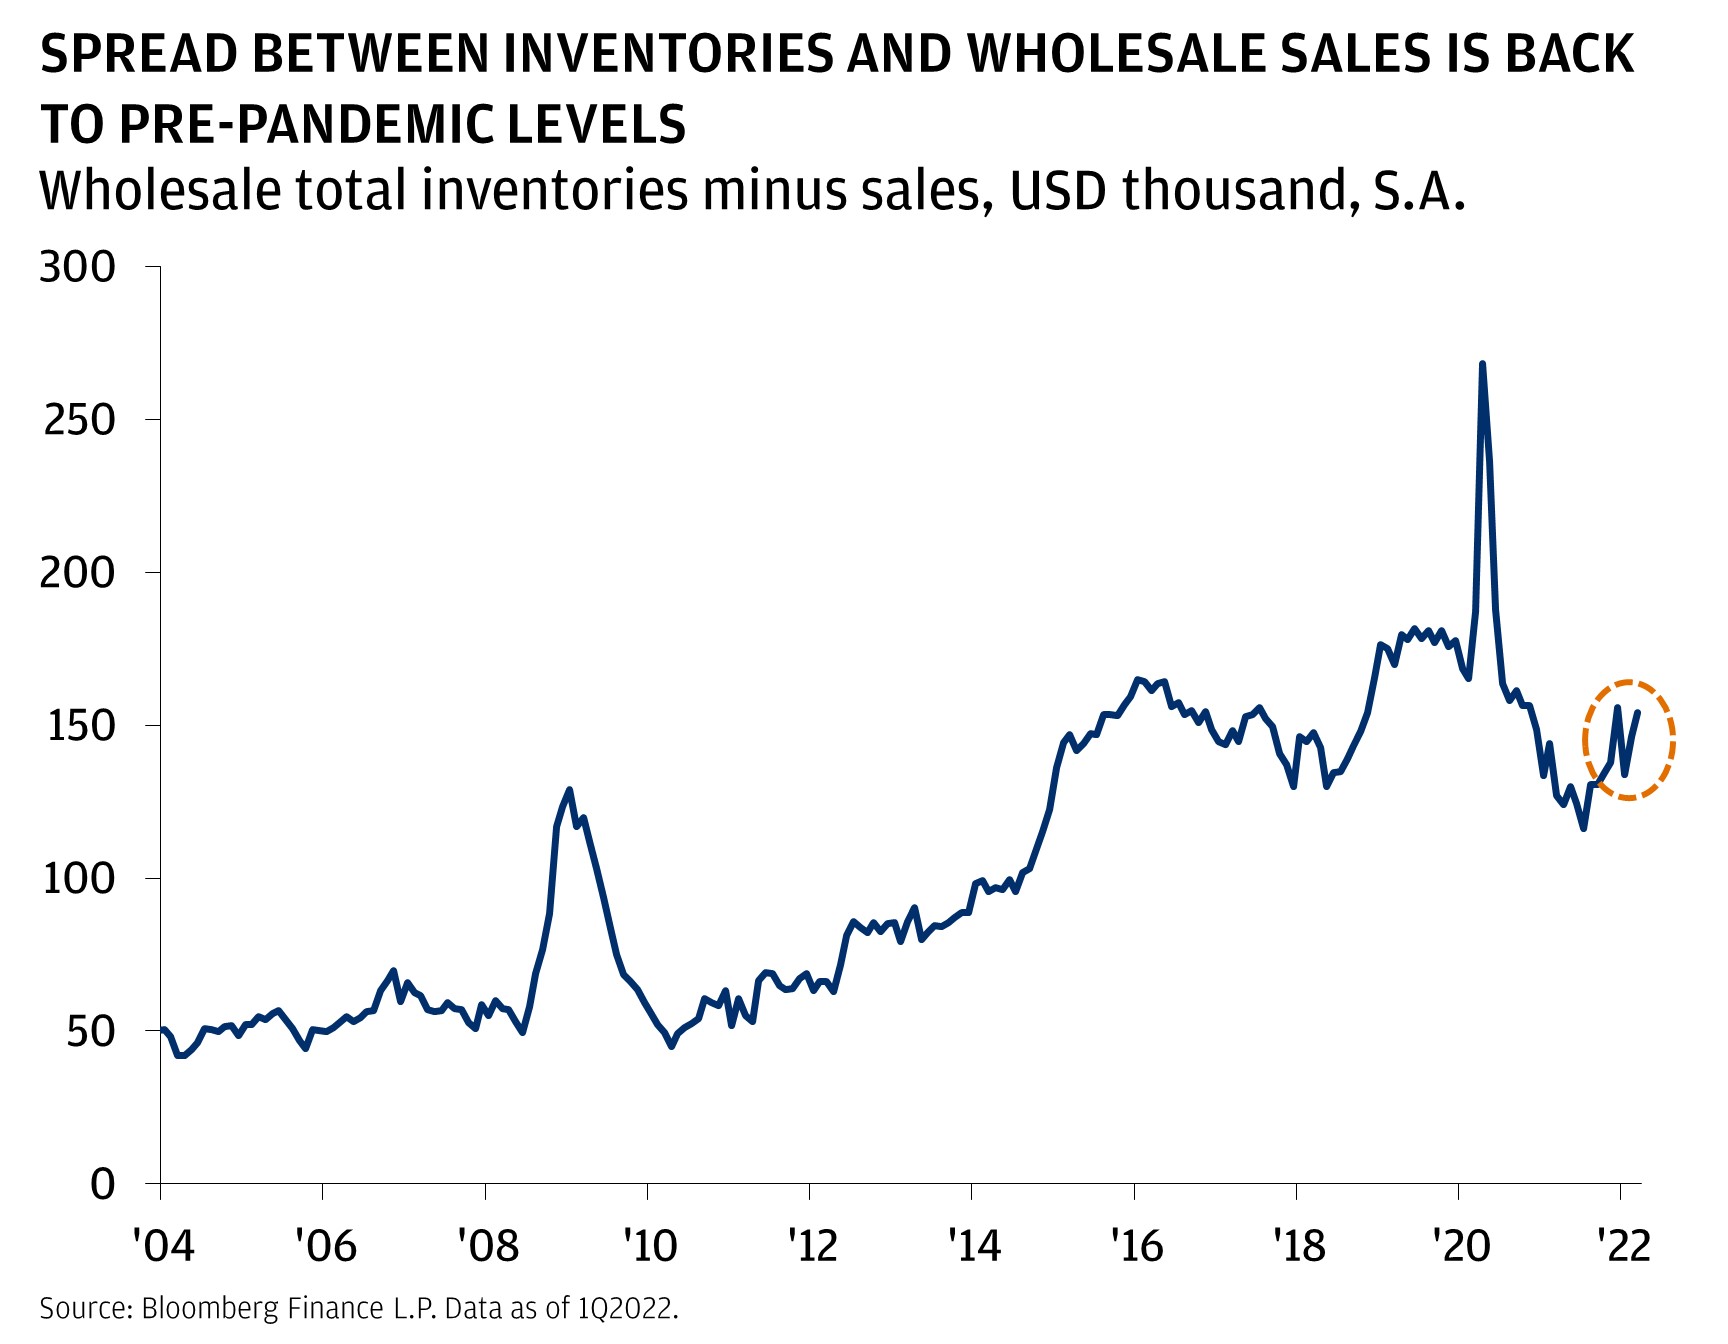 This chart shows the spread between inventories and wholesale sales from February 2004 until March 2022